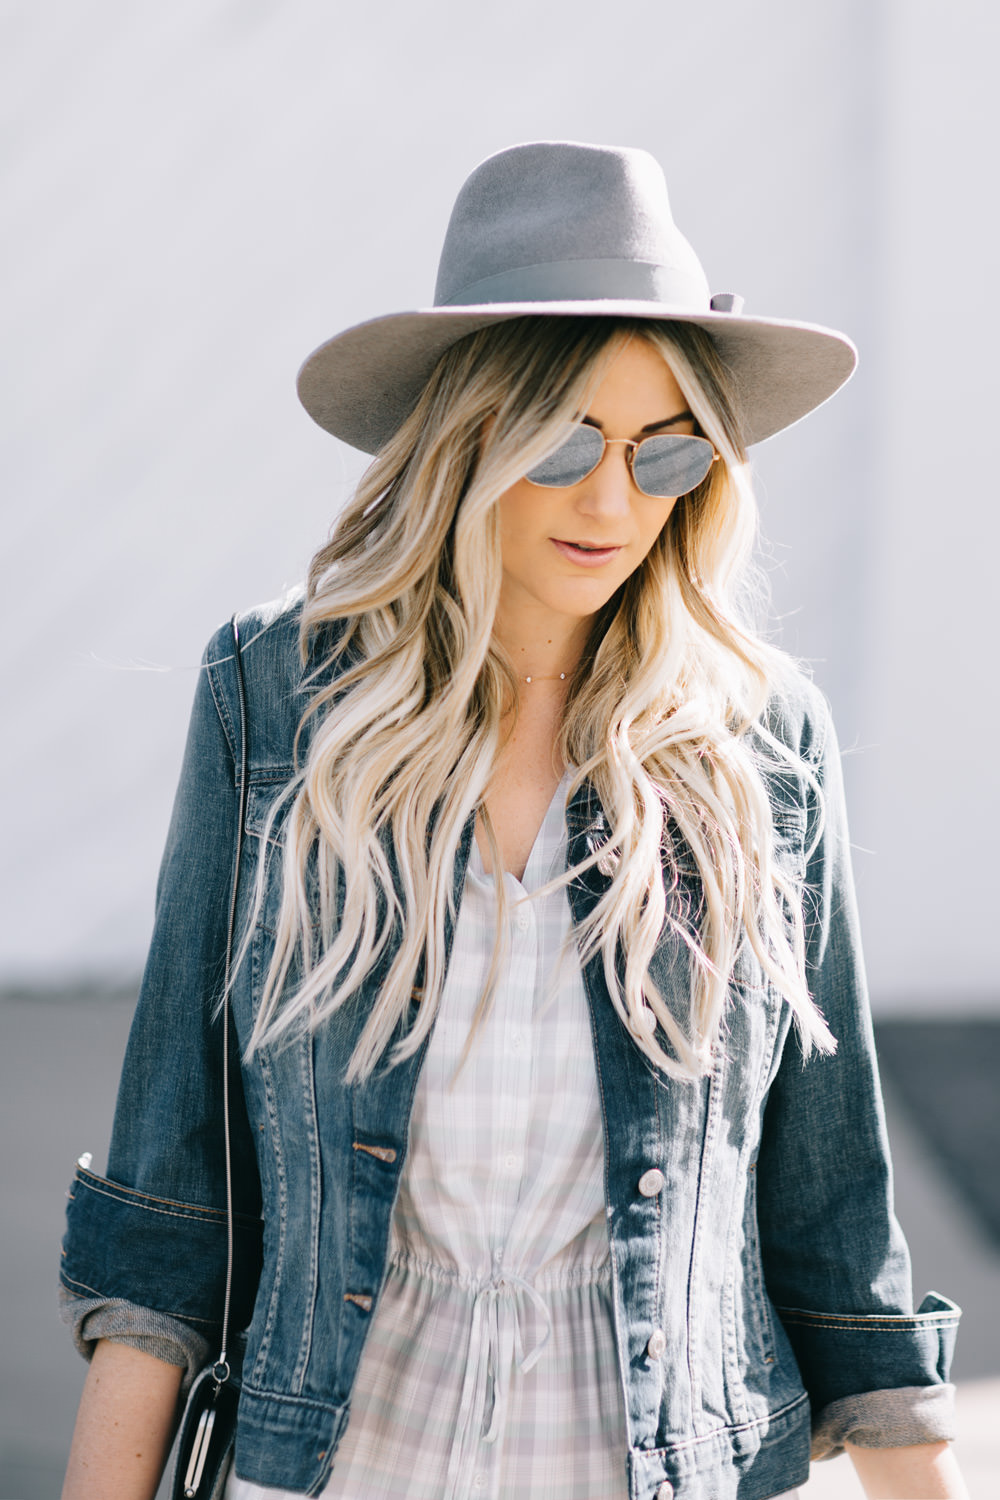 Dash of Darling shares how to shop smart with an affordable spring outfit with thredUP